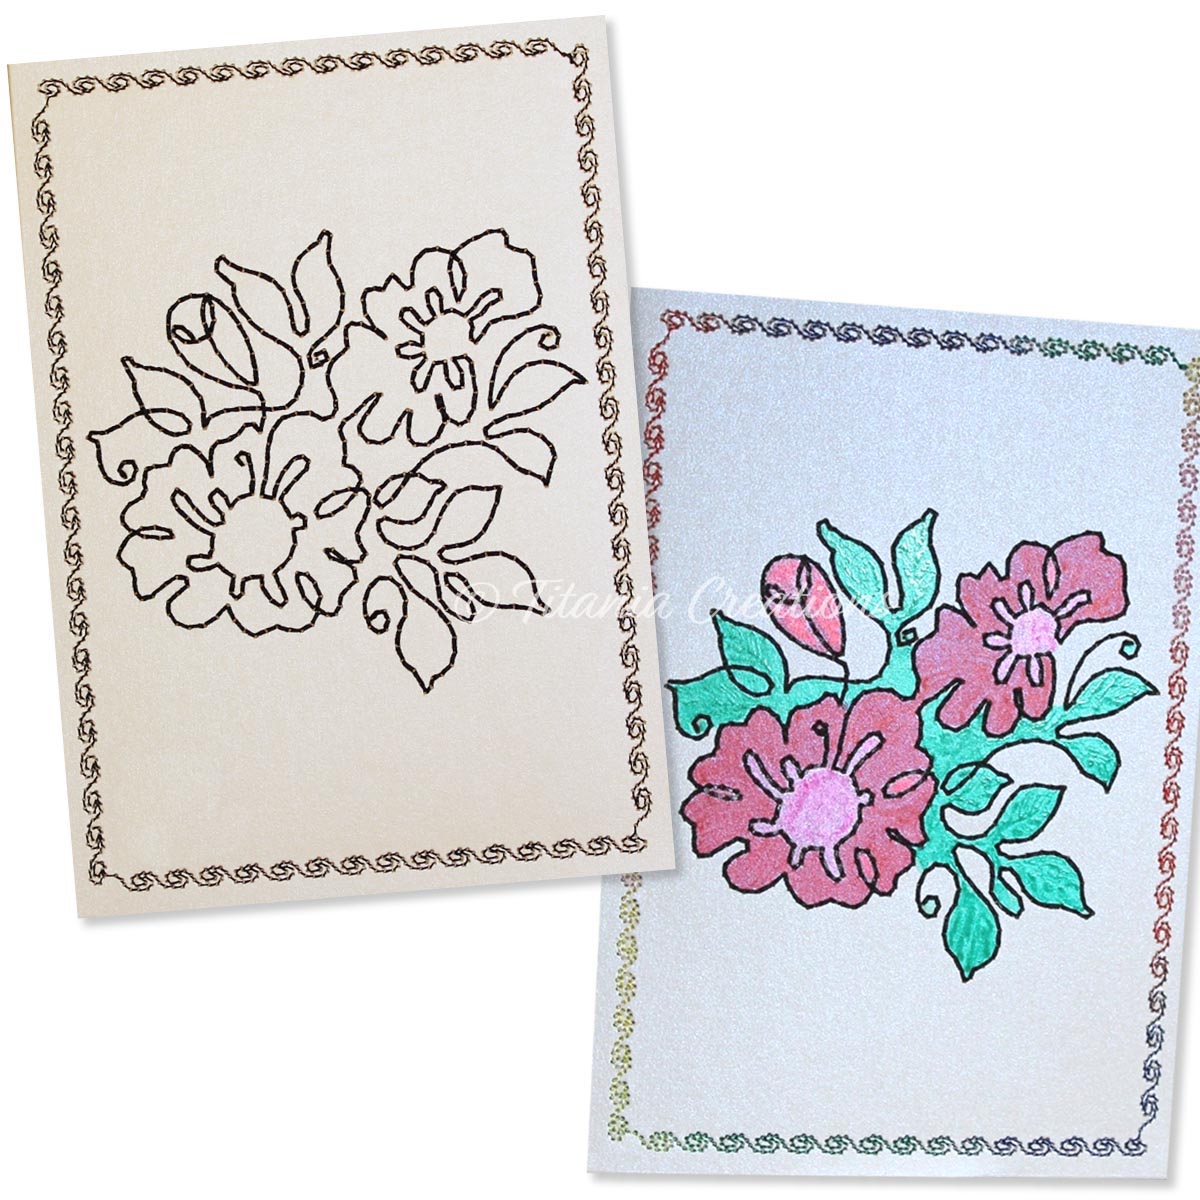 Simply Floral 02 Card Stock Design 5x7